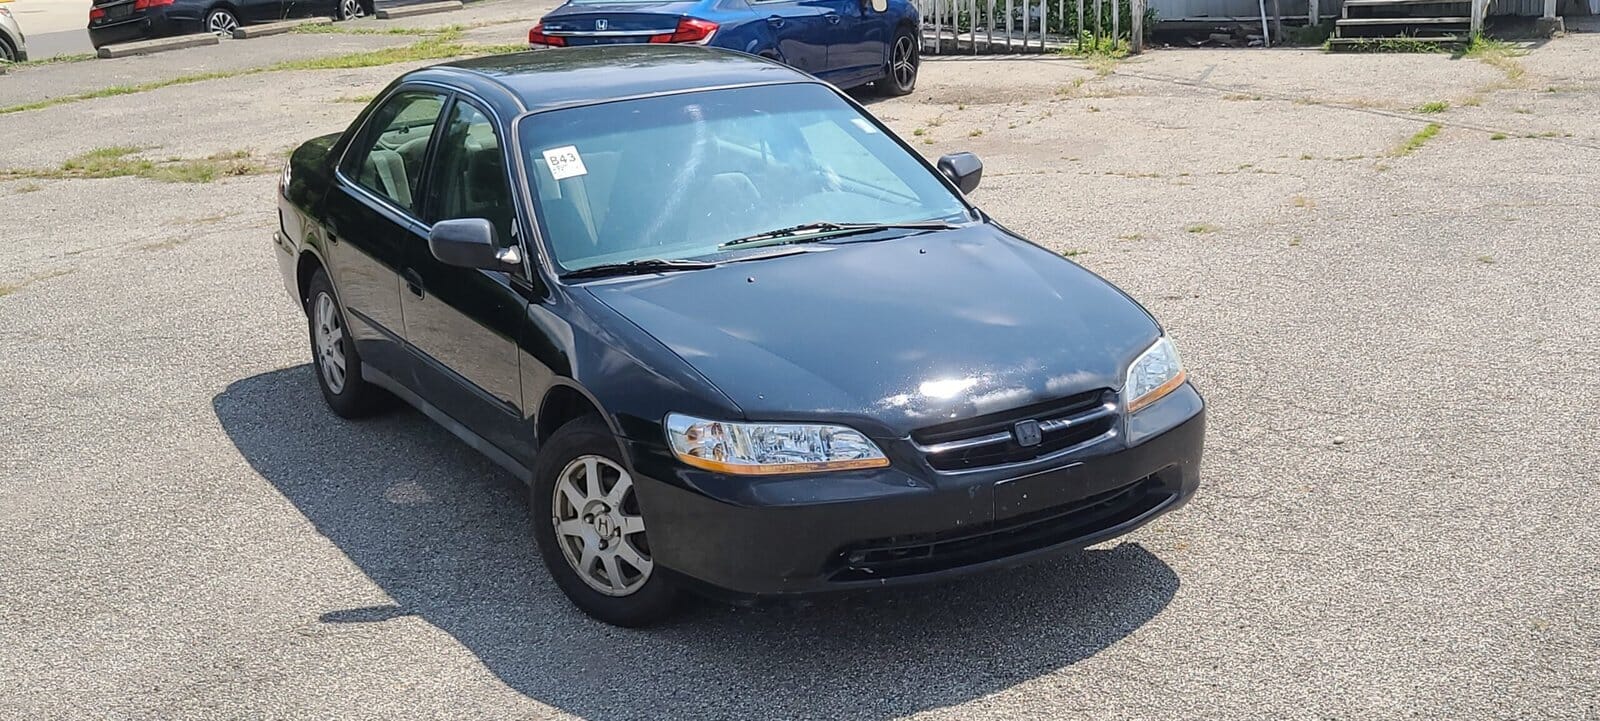 Read more about the article **SOLD**2000 Honda Accord LX**SOLD**